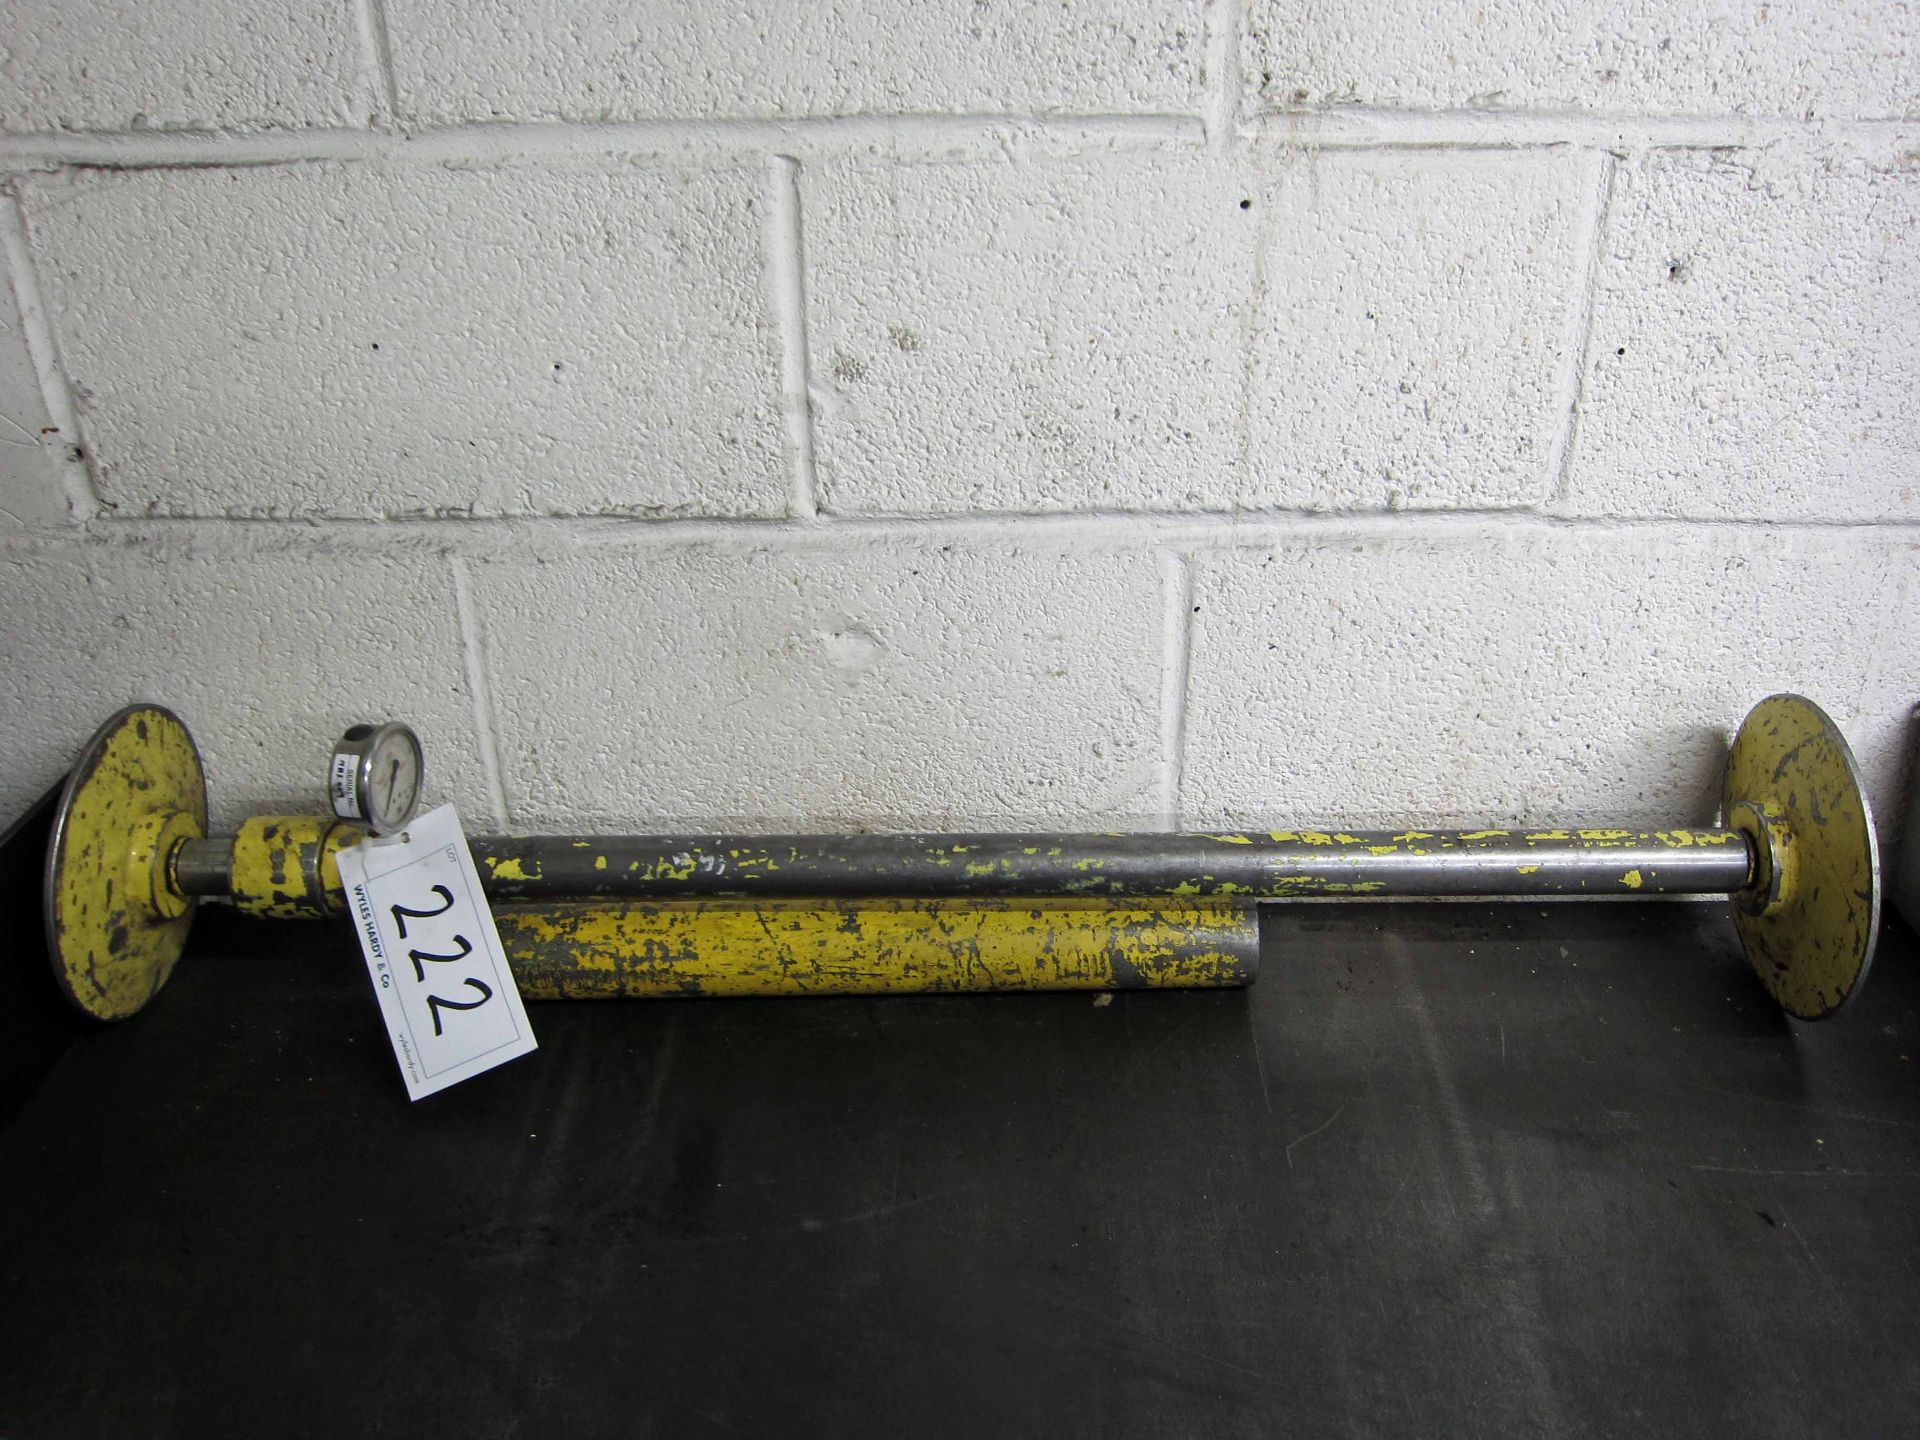 A RONCARI Pogo Stick Hydraulic Clamp Force Measuring Device with Analogue Dial and complete with